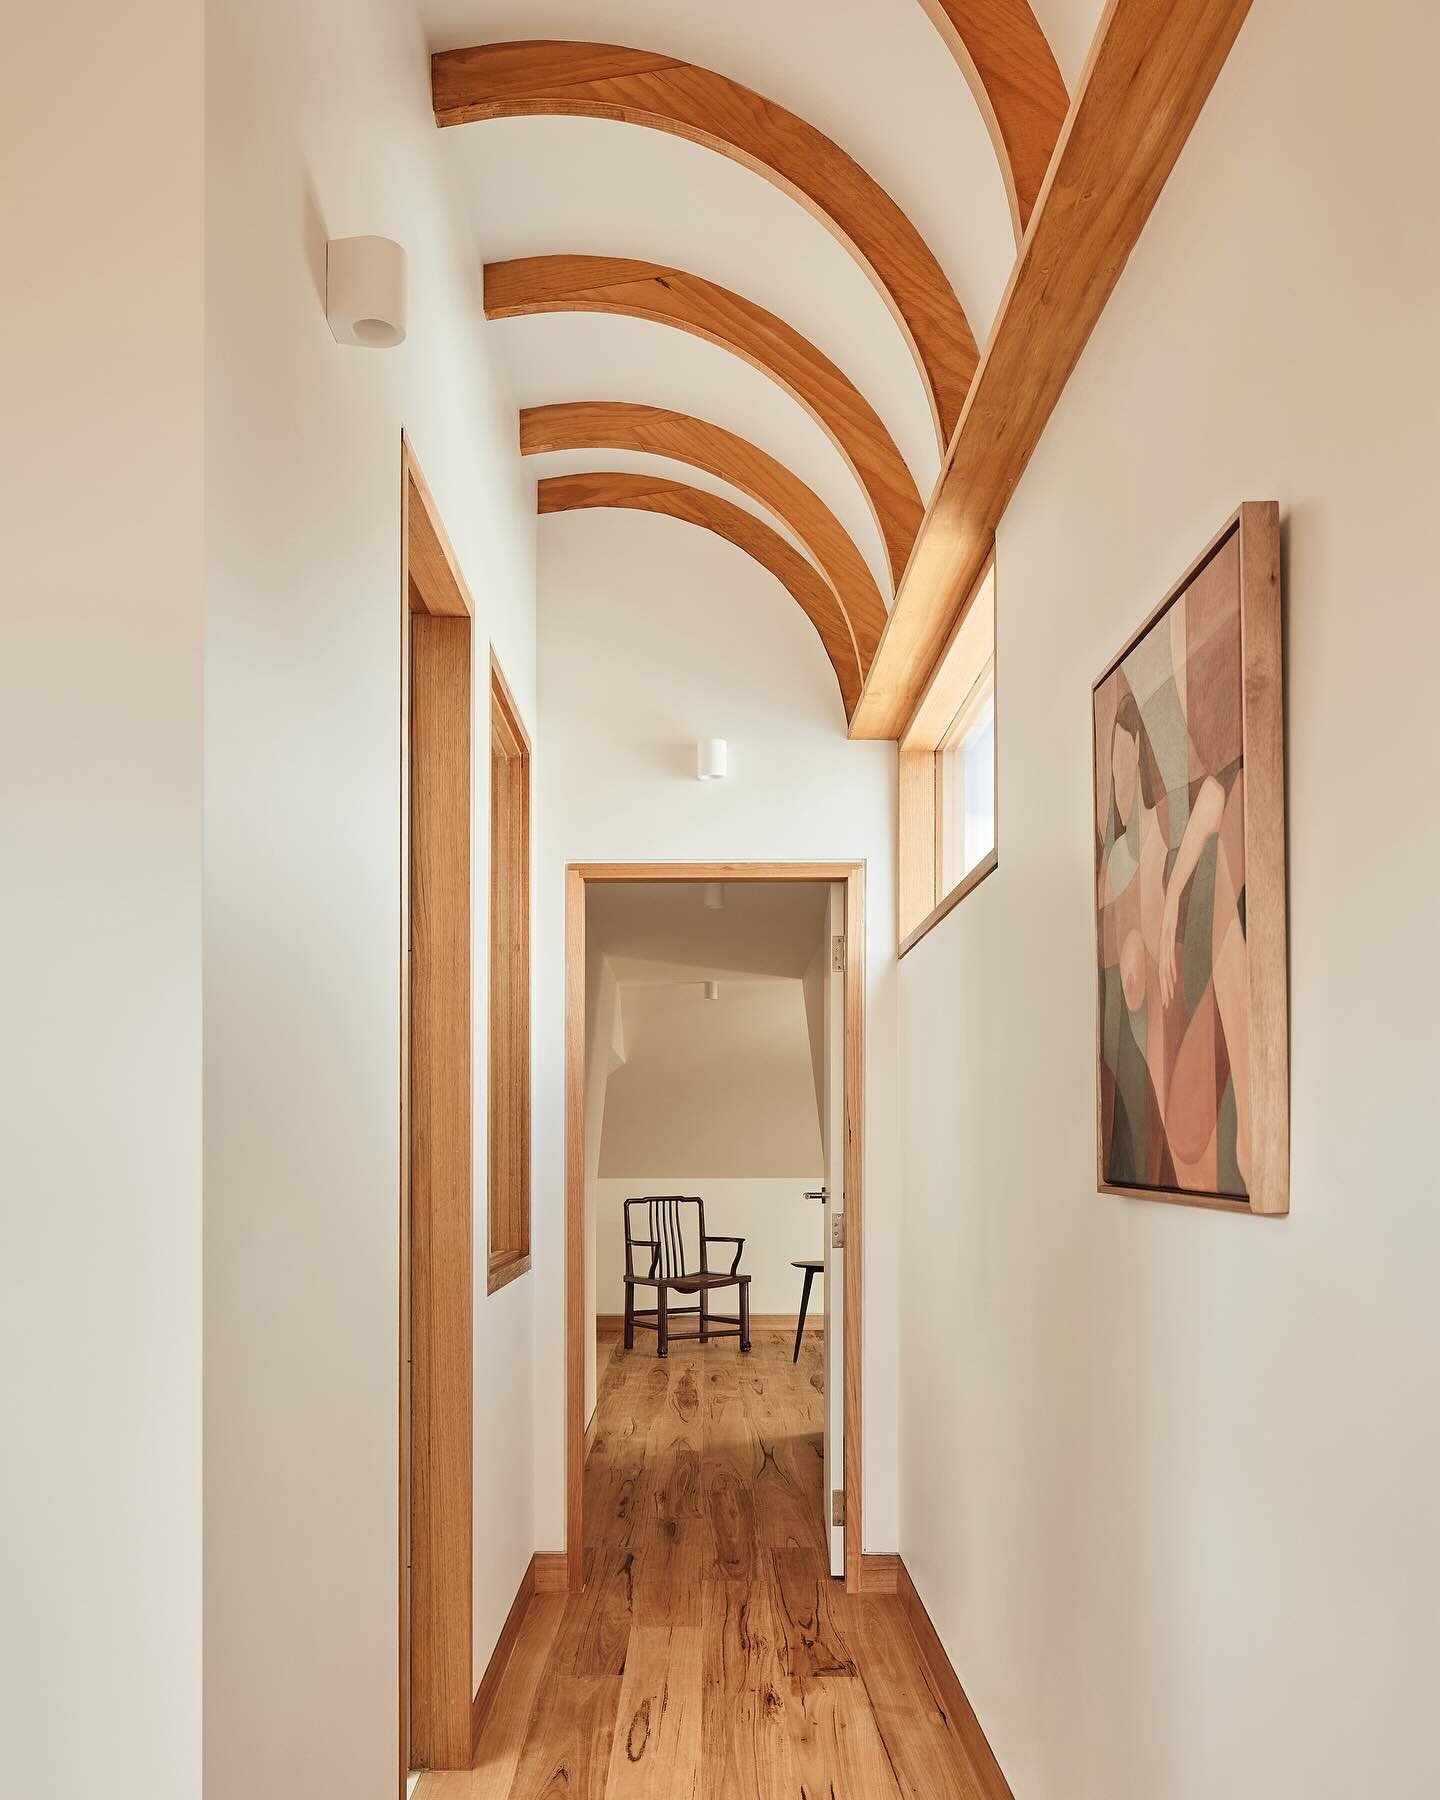 A lot of the older houses we work on have expansive attic spaces that are under-utlilised and difficult to access. In this reno, the new first floor directly connects to the attic so that it is no longer concealed, and makes use of a space that was a